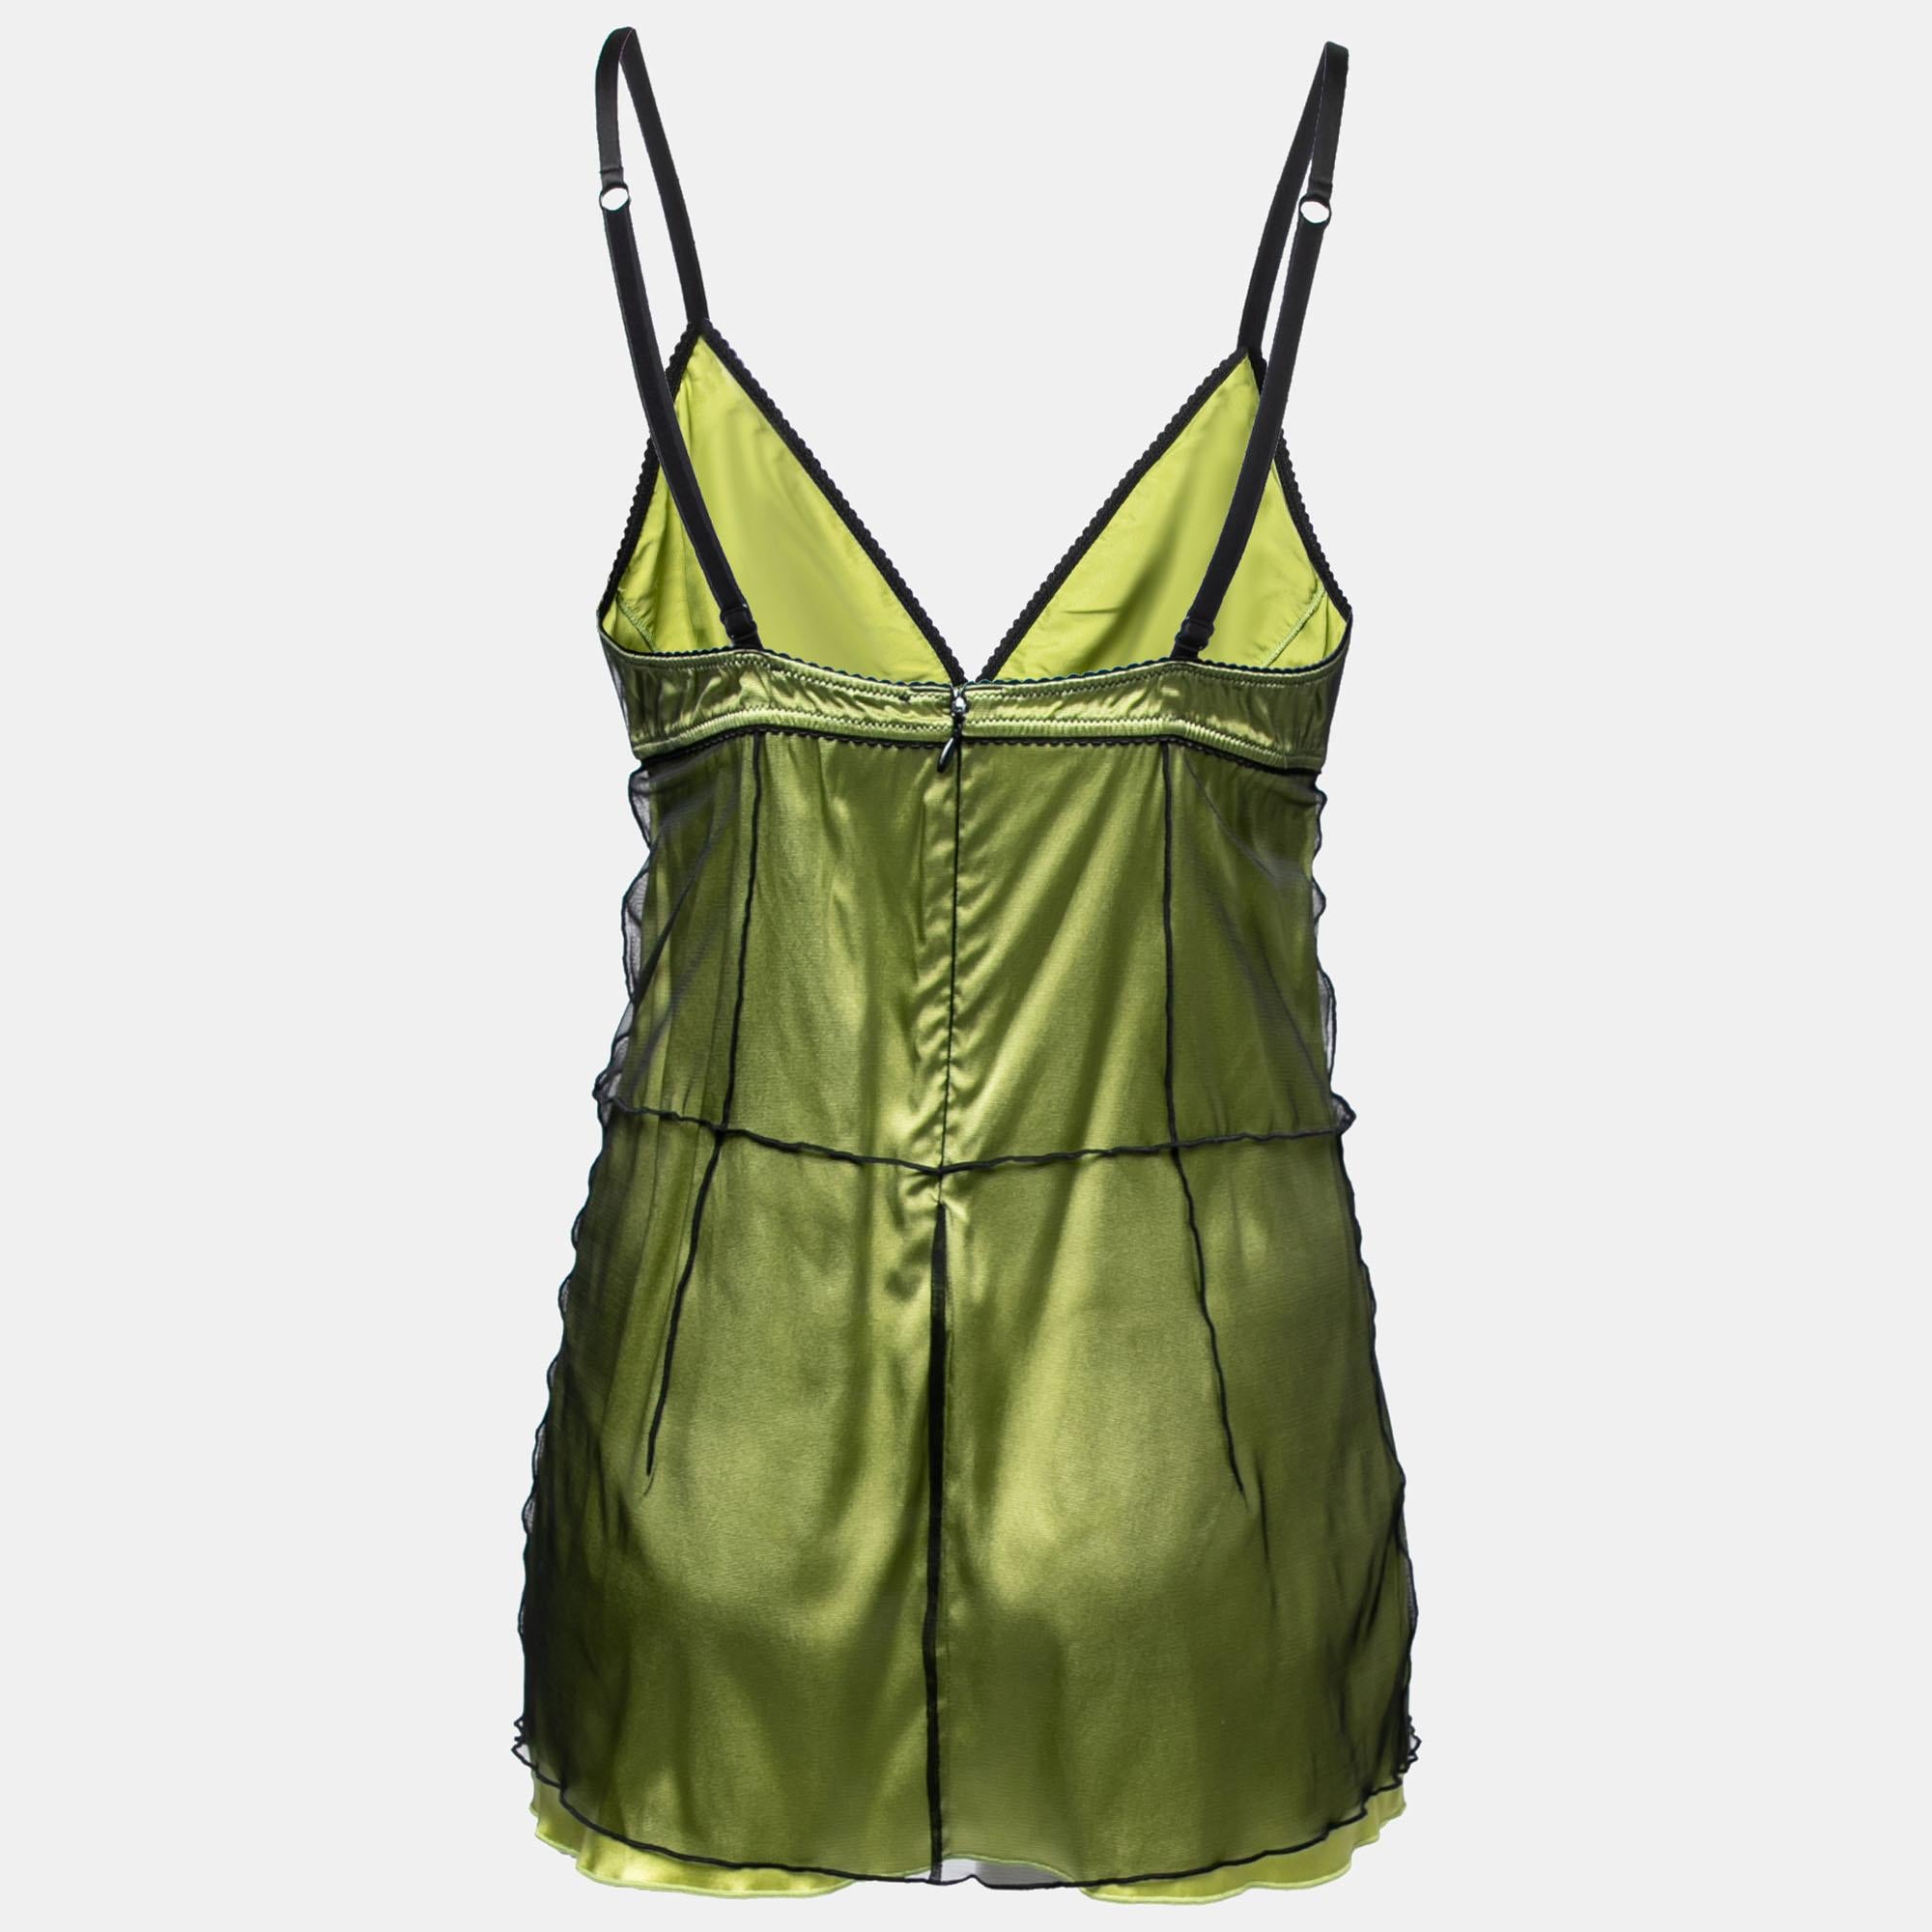 Stylish and feminine, this lovely camisole from Dolce & Gabbana is stunning. Crafted from a silk blend, it carries a shade of green hue and flaunts intricate lace trims, thin straps, and a flattering fit. The creation will pair well with a host of